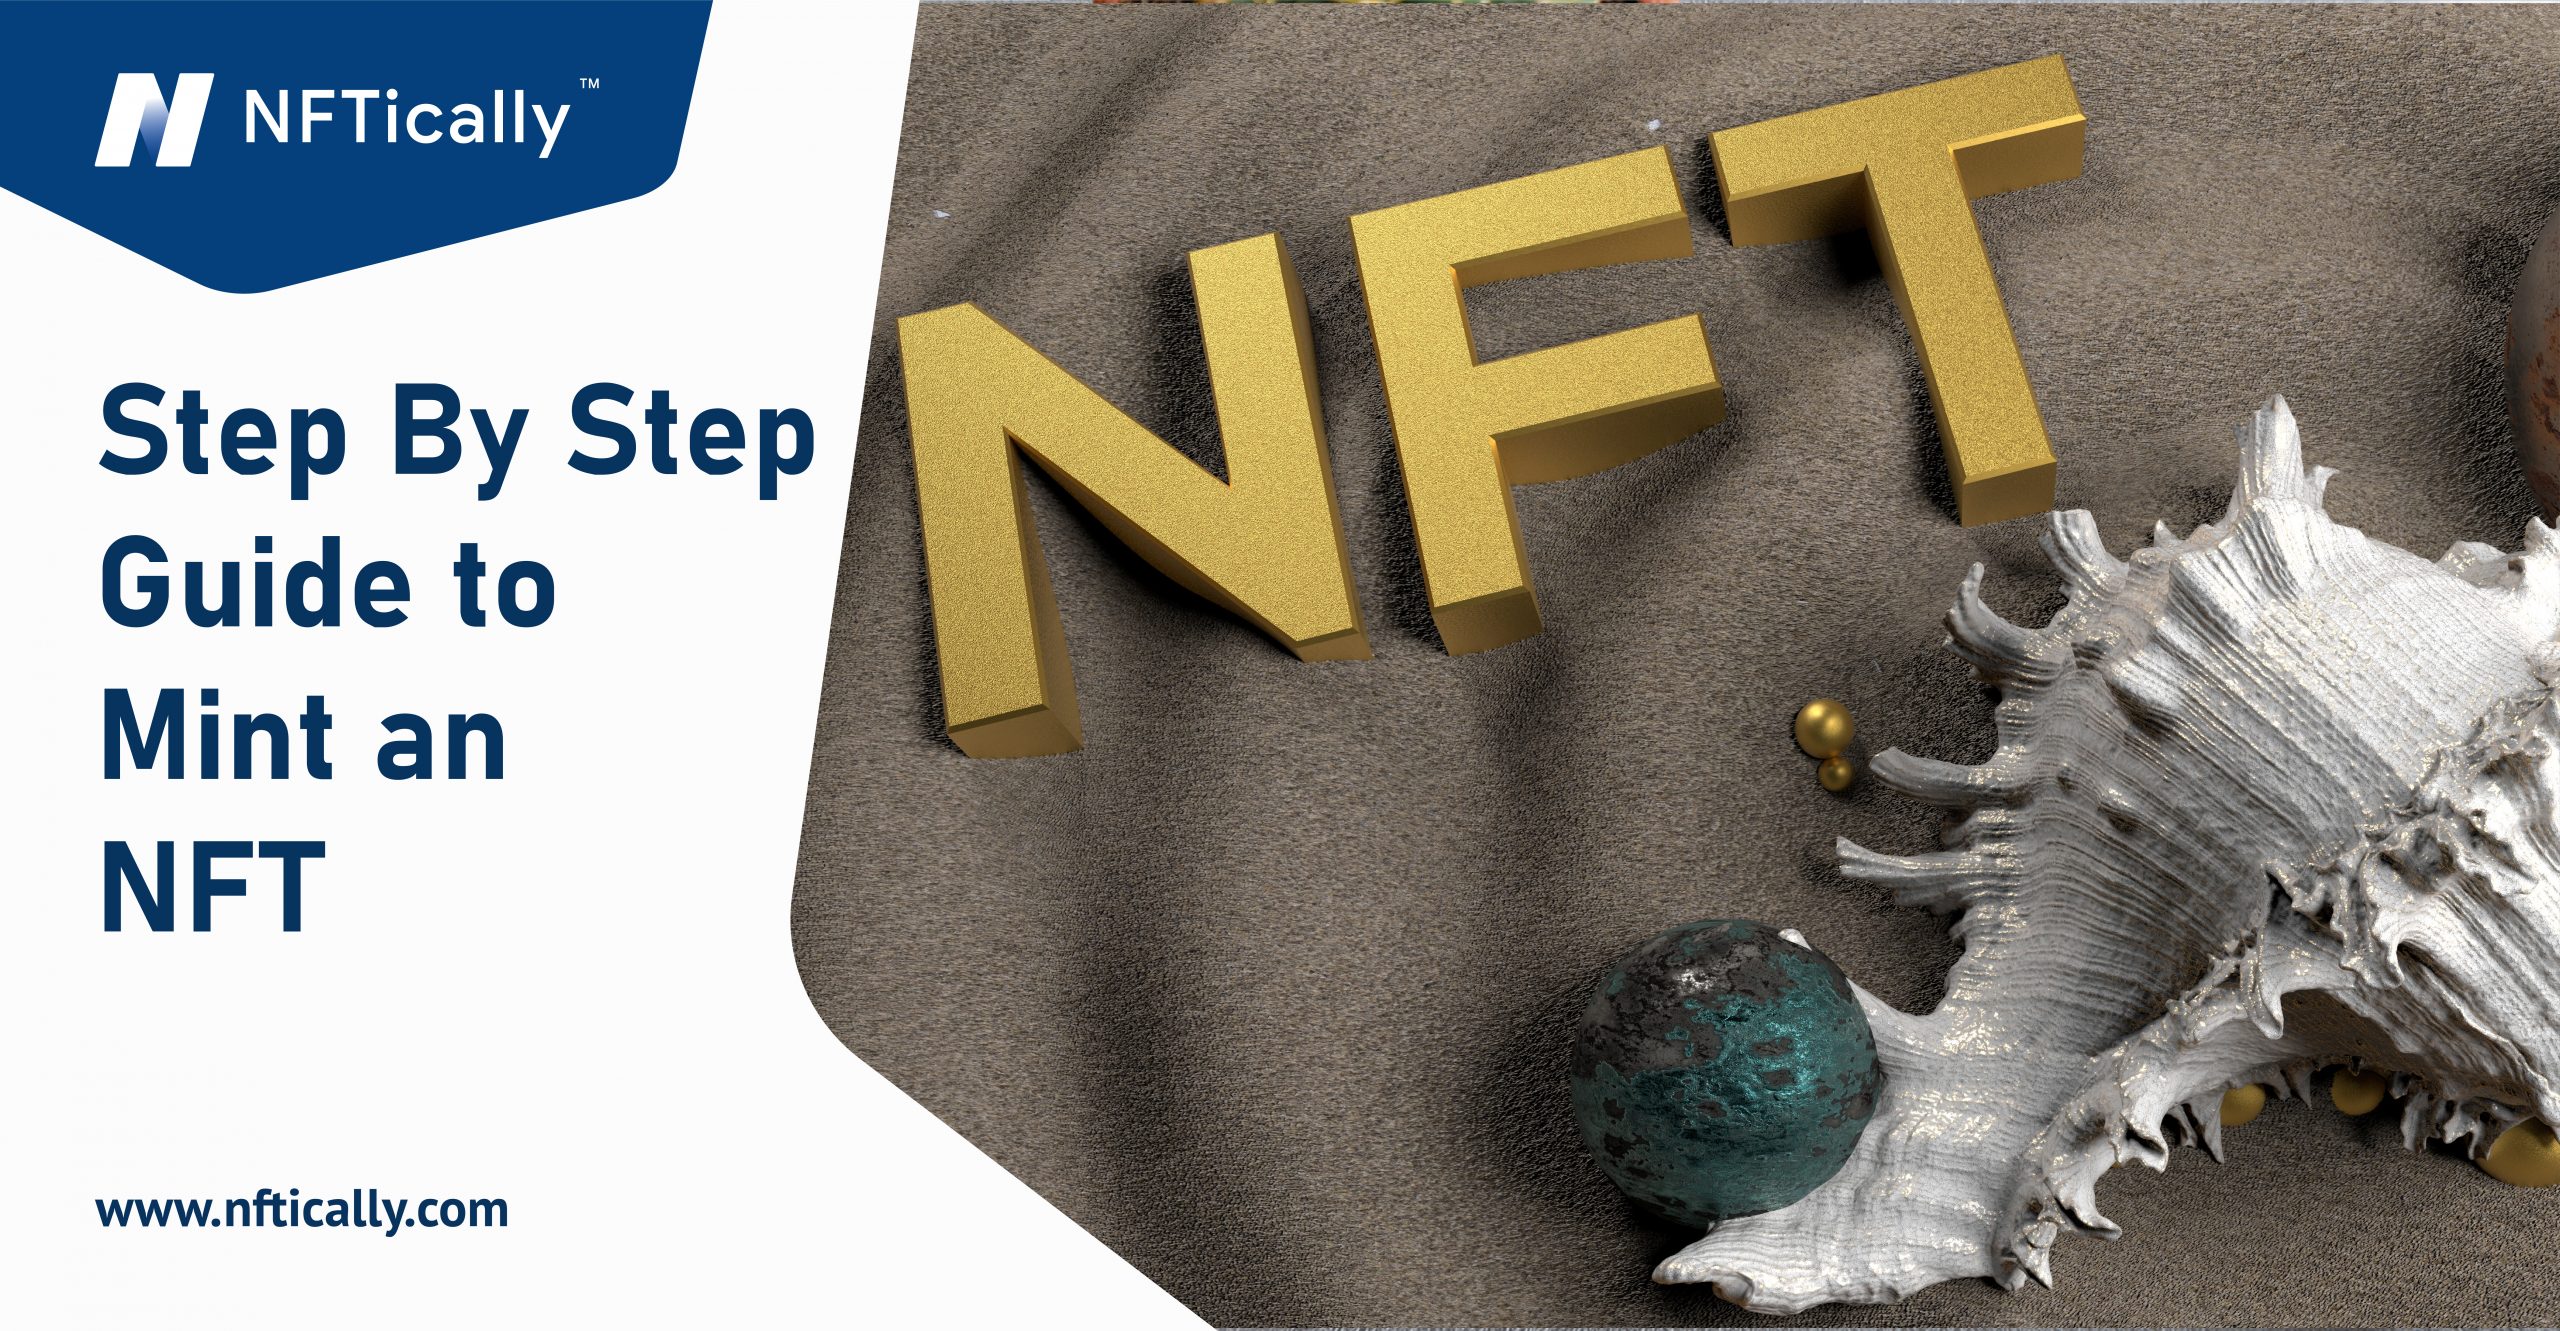 Step By Step Guide to Mint an NFT